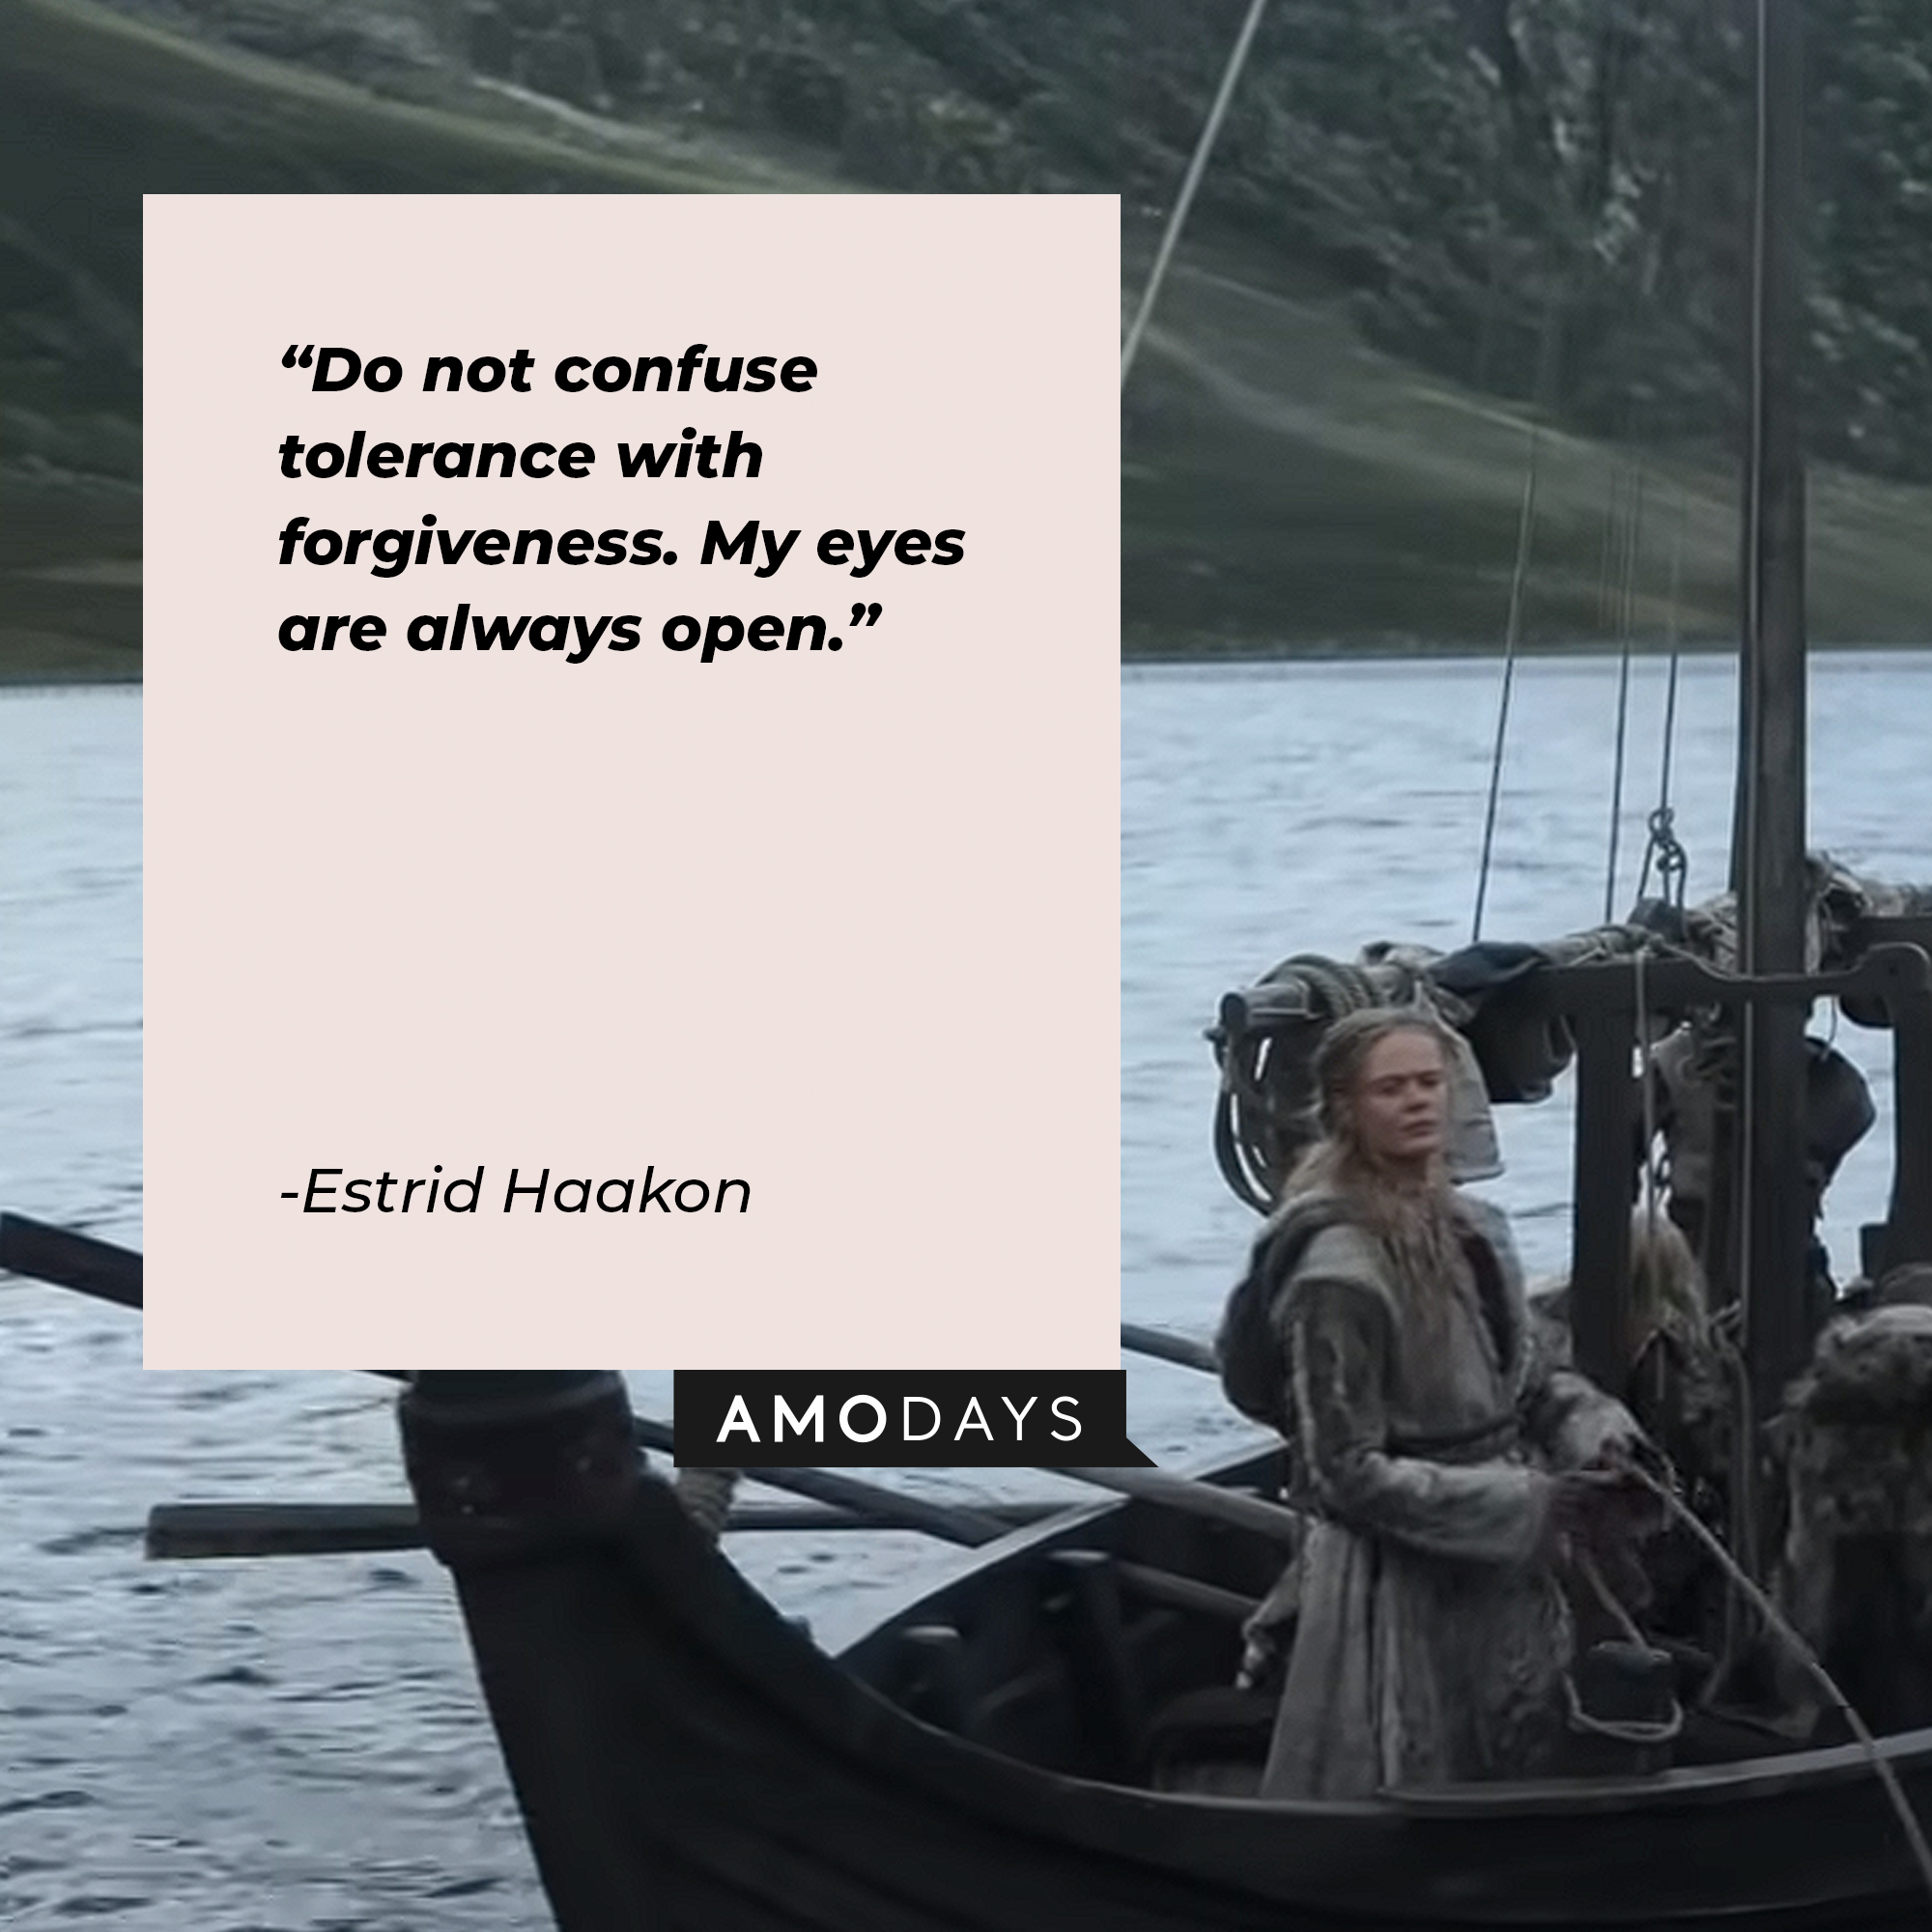 Estrid Haakon's quote: "Do not confuse tolerance with forgiveness. My eyes are always open." | Image: youtube.com/Netflix